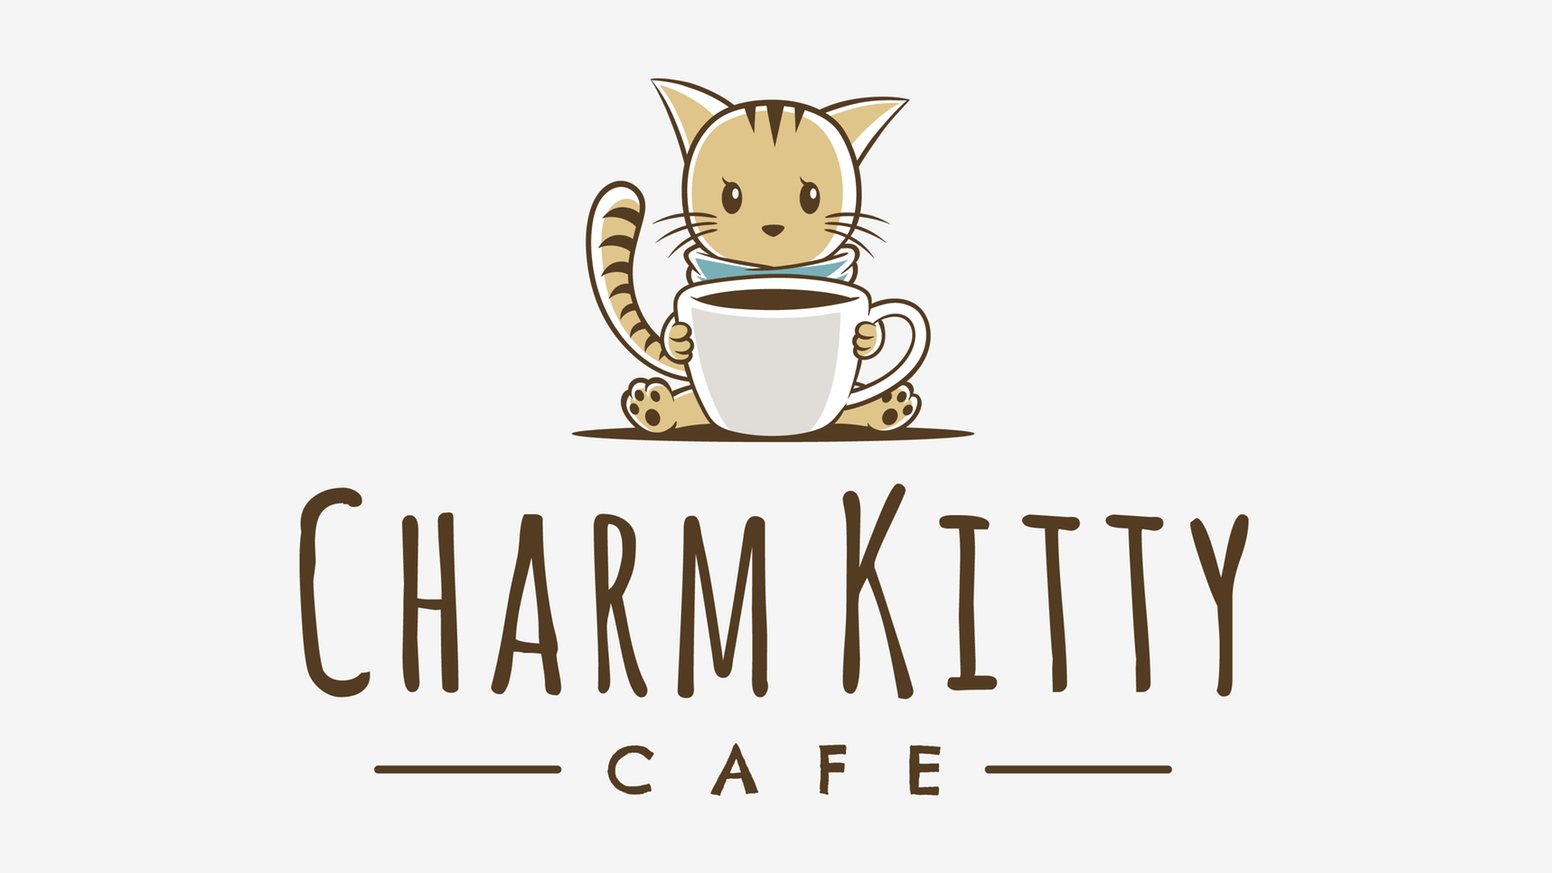 Famous Cat Logo - Charm Kitty Cafe: Baltimore's Cat Cafe by Cam Tucker » Famous Cat ...